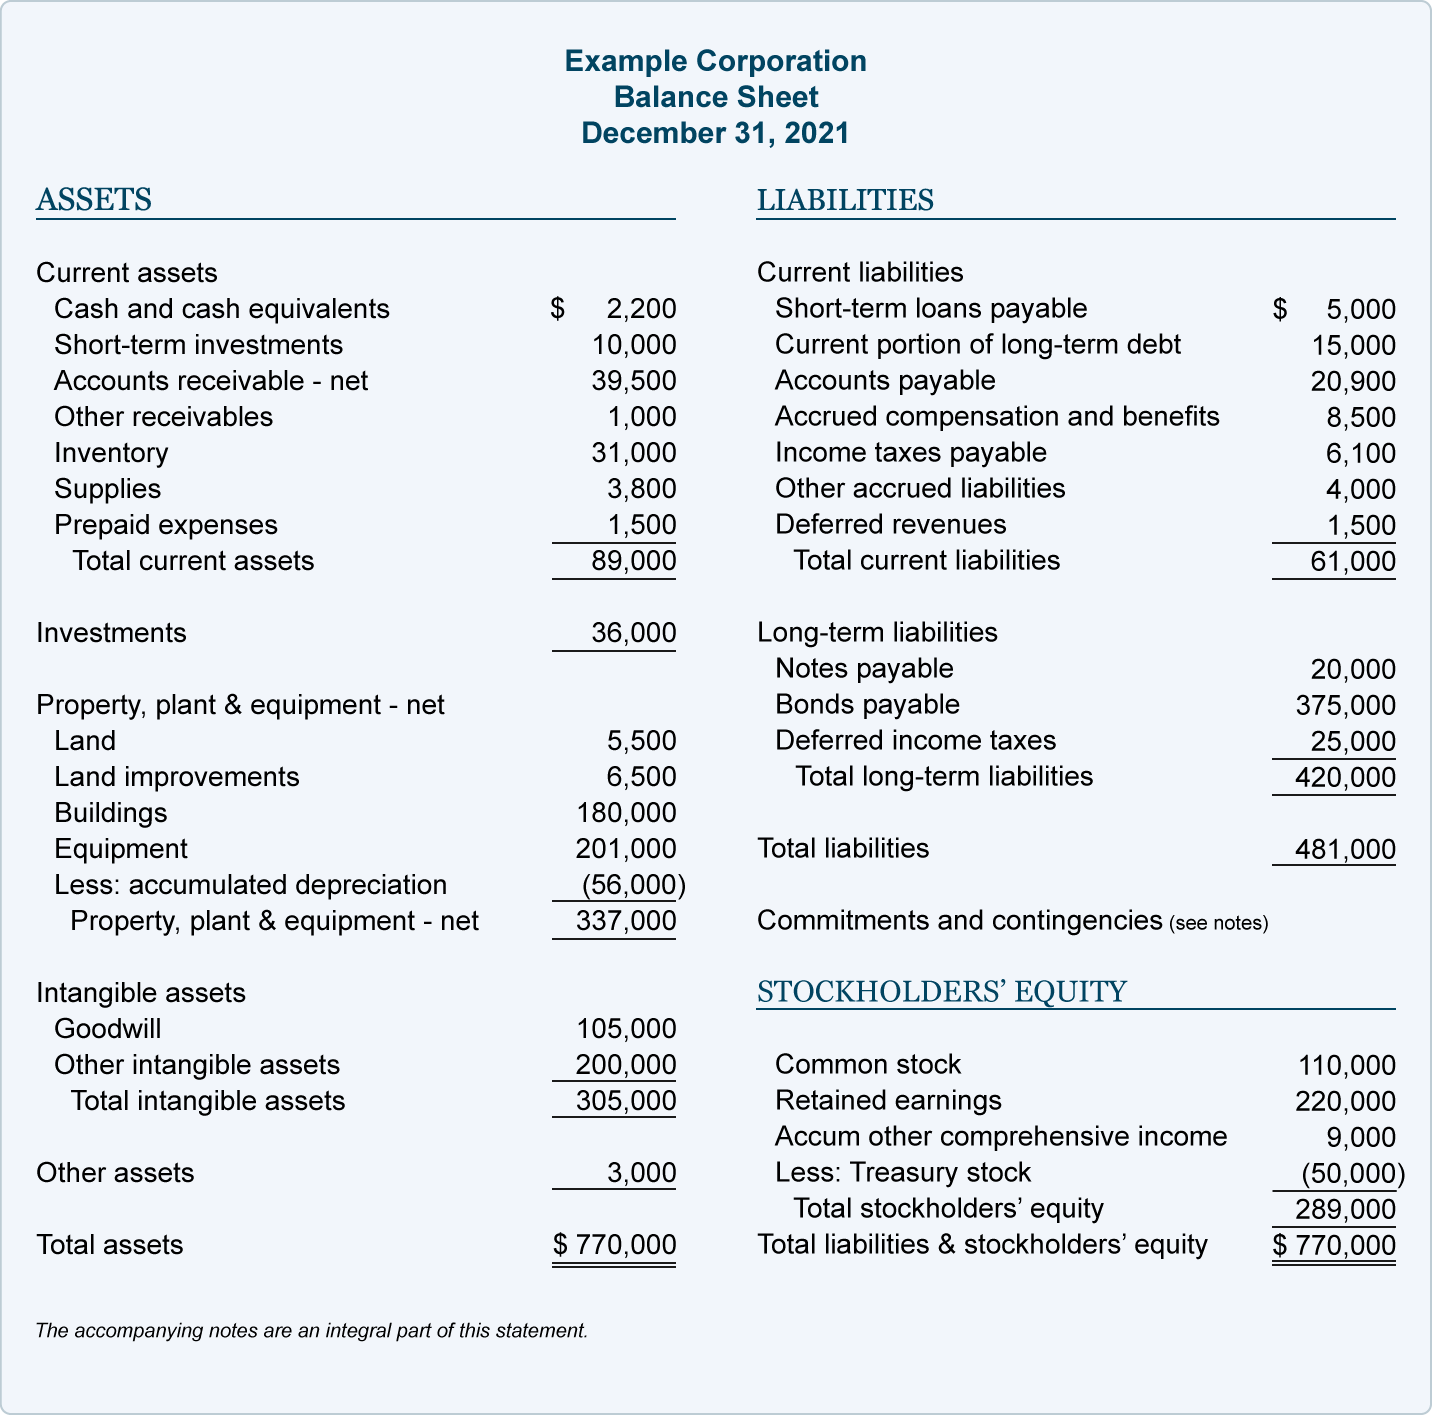 Example of a corporate balance sheet